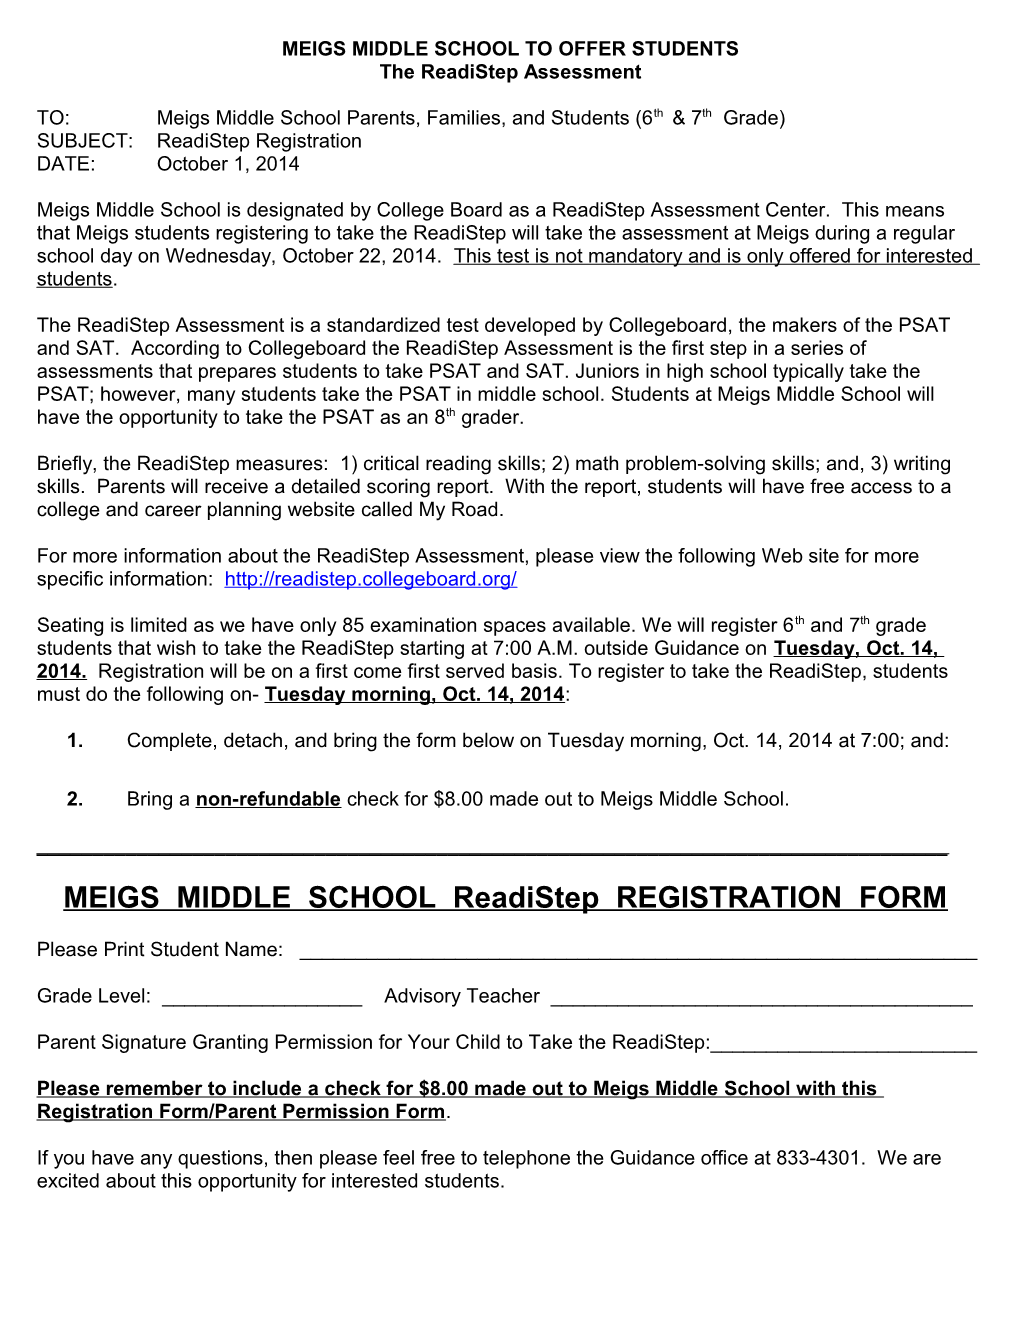 Meigs Middle School to Offer Students Psat